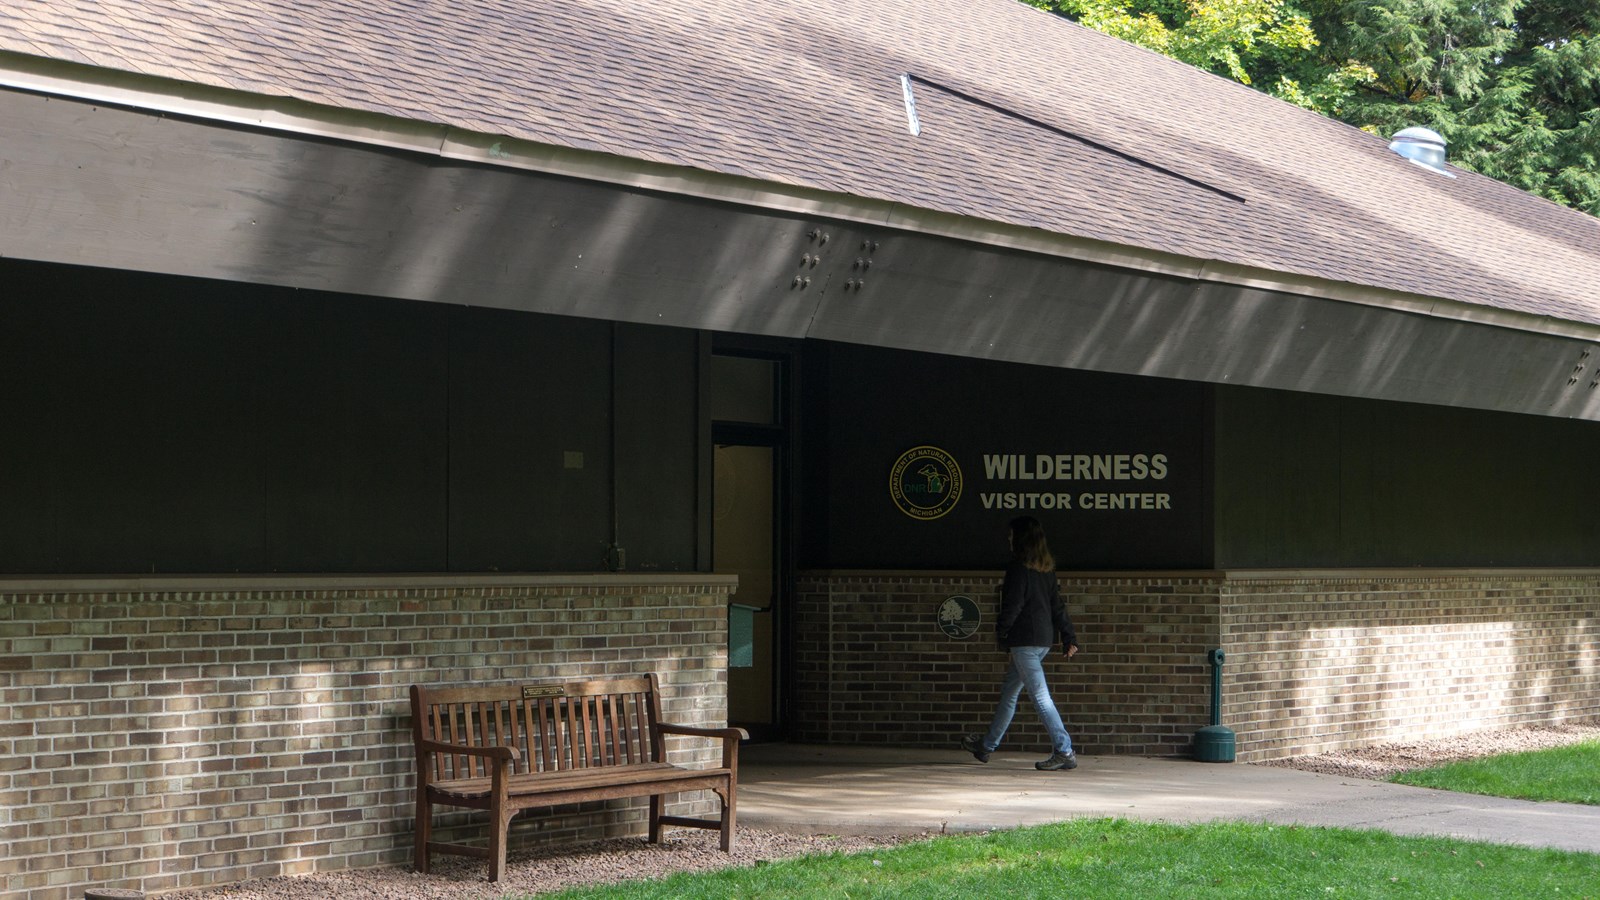 brick and wood building with steep asphalt shingled roof. A sign reads Wilderness Visitor Center